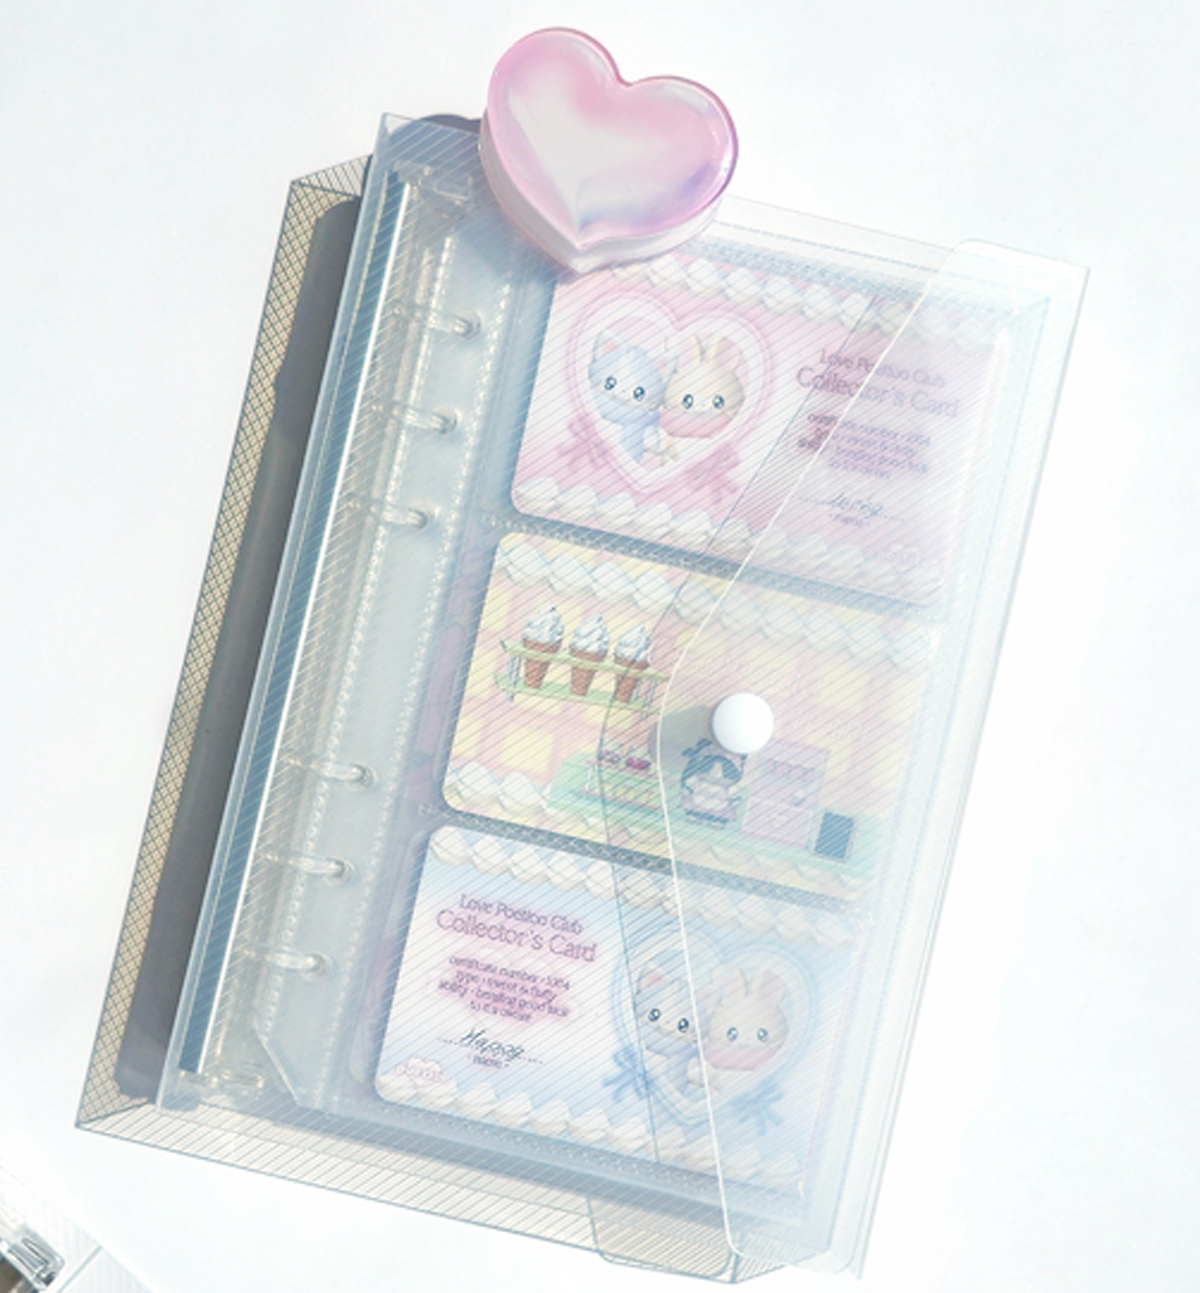 A6 Clear Button Binder Cover